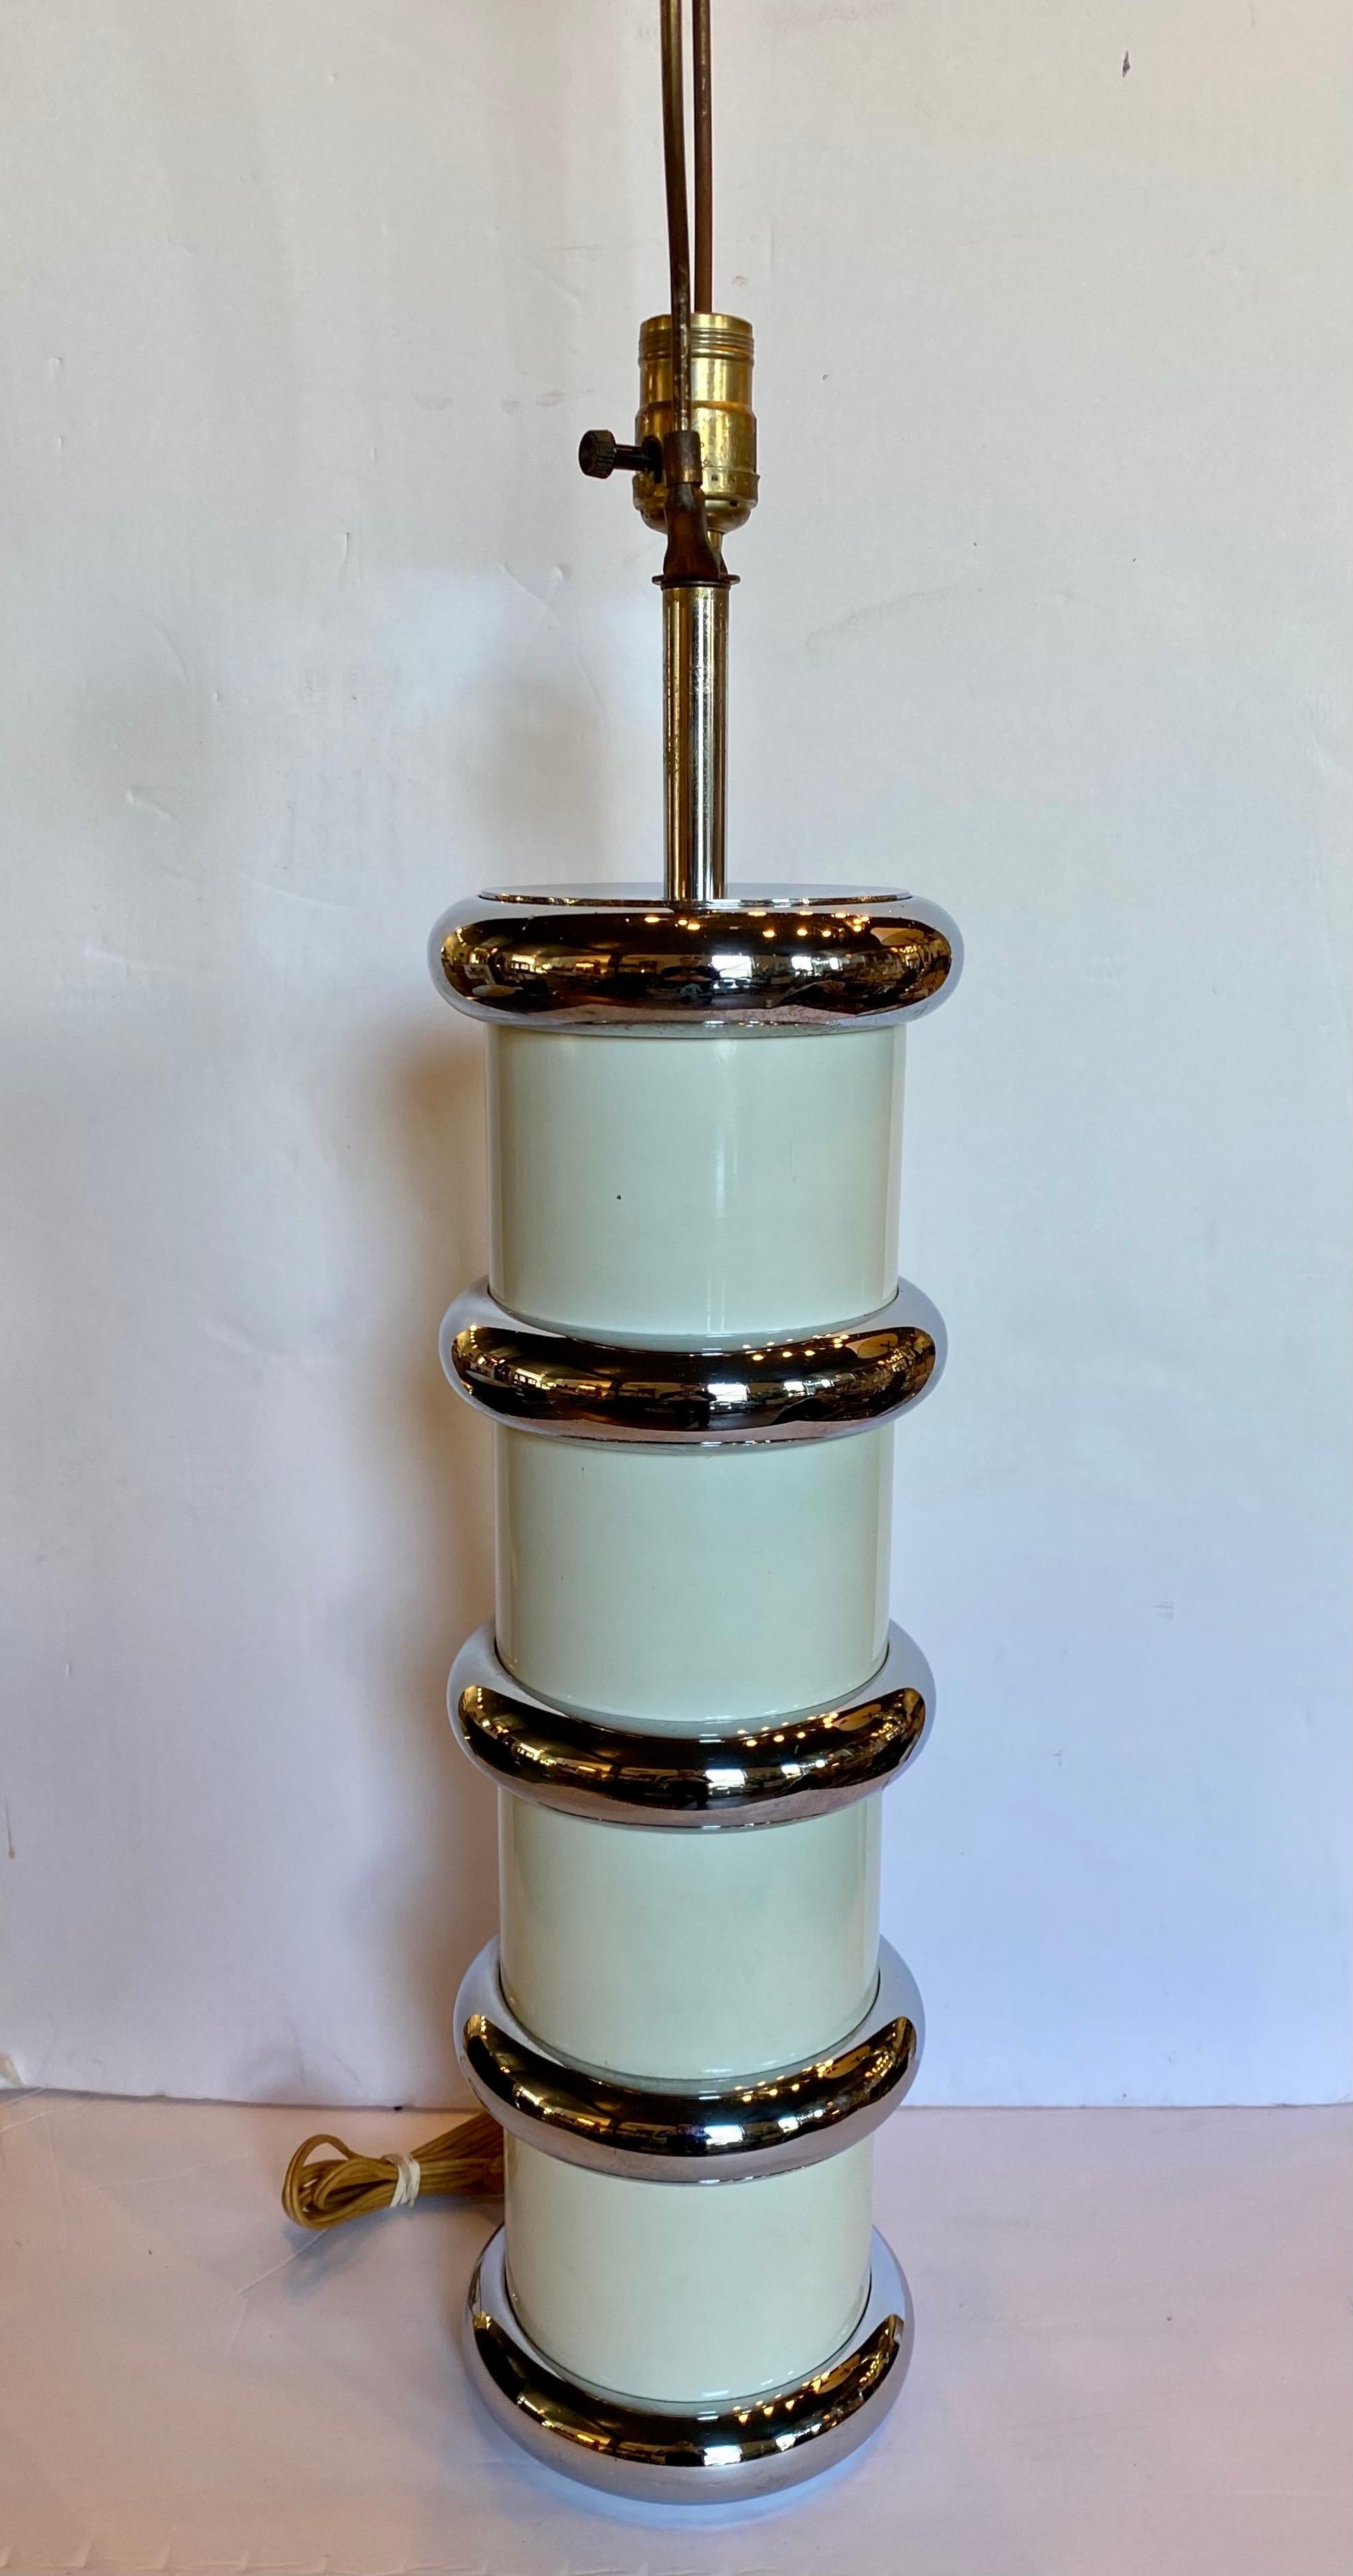 Mid-Century Modern chromed metal and enamel table lamp by Mutual Sunset Lamp Company. This tall round cylinder shaped lamp features an ivory/cream enamel column wrapped with stacked chromed metal bullnose rings. In the style of Karl Springer. Lamp